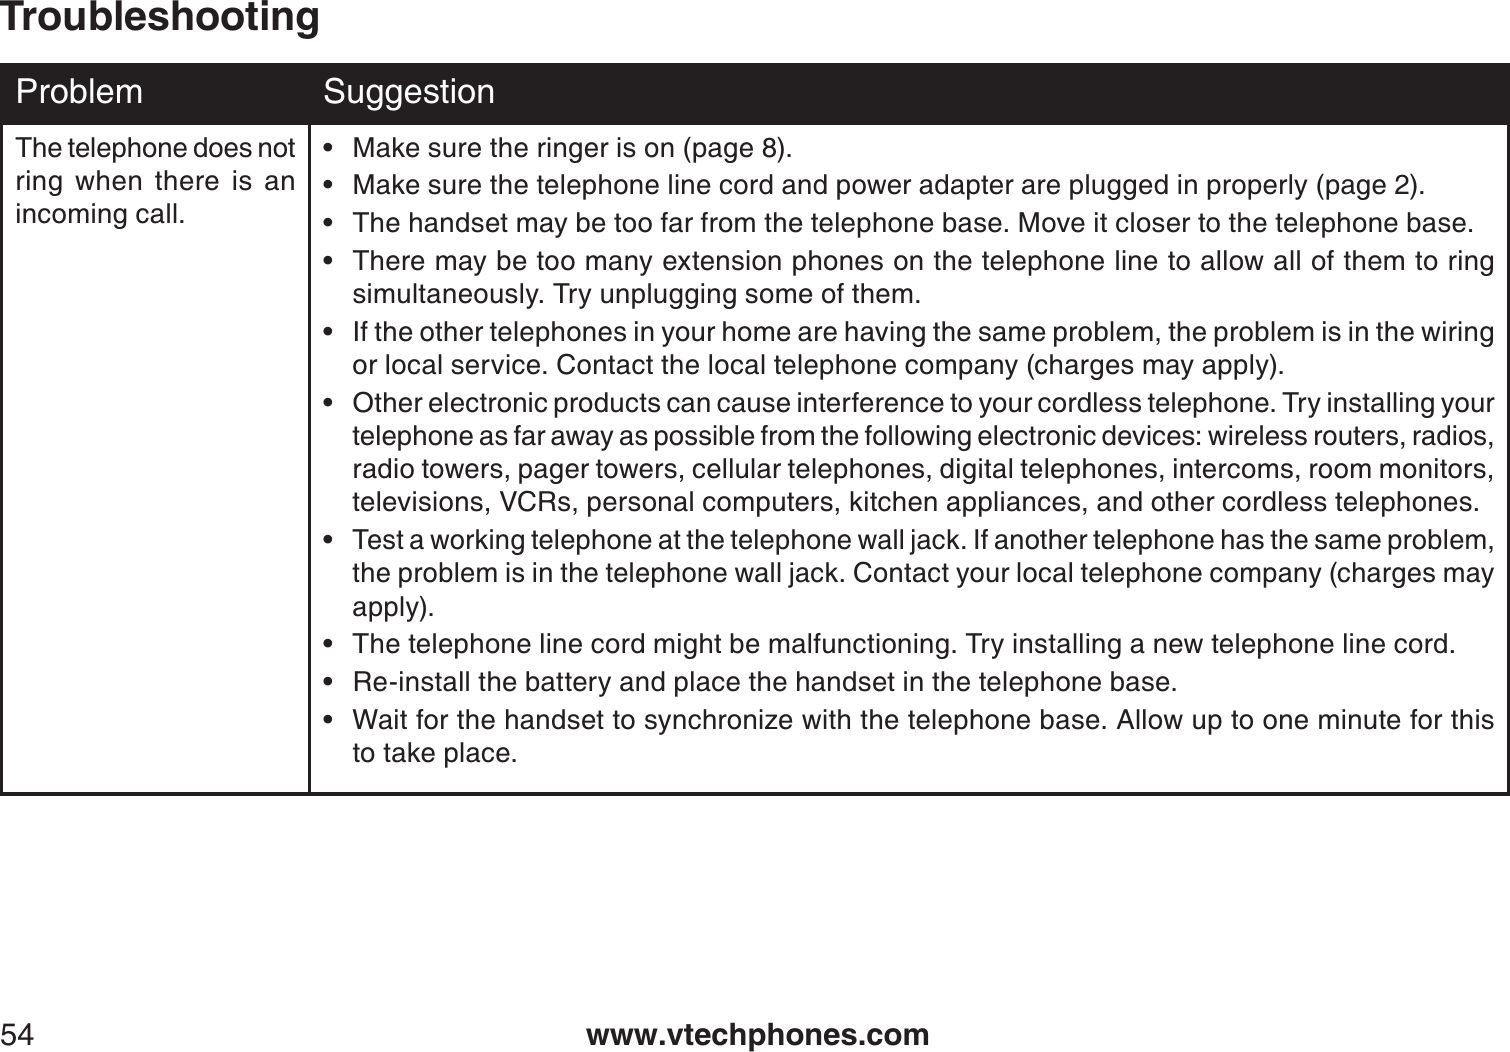 www.vtechphones.com54TroubleshootingProblem SuggestionThe telephone does not ring when there is an incoming call.Make sure the ringer is on (page 8).Make sure the telephone line cord and power adapter are plugged in properly (page 2).The handset may be too far from the telephone base. Move it closer to the telephone base.There may be too many extension phones on the telephone line to allow all of them to ring simultaneously. Try unplugging some of them.If the other telephones in your home are having the same problem, the problem is in the wiring or local service. Contact the local telephone company (charges may apply).Other electronic products can cause interference to your cordless telephone. Try installing your telephone as far away as possible from the following electronic devices: wireless routers, radios, radio towers, pager towers, cellular telephones, digital telephones, intercoms, room monitors, televisions, VCRs, personal computers, kitchen appliances, and other cordless telephones.Test a working telephone at the telephone wall jack. If another telephone has the same problem, the problem is in the telephone wall jack. Contact your local telephone company (charges may apply).The telephone line cord might be malfunctioning. Try installing a new telephone line cord.Re-install the battery and place the handset in the telephone base.Wait for the handset to synchronize with the telephone base. Allow up to one minute for thisto take place.••••••••••